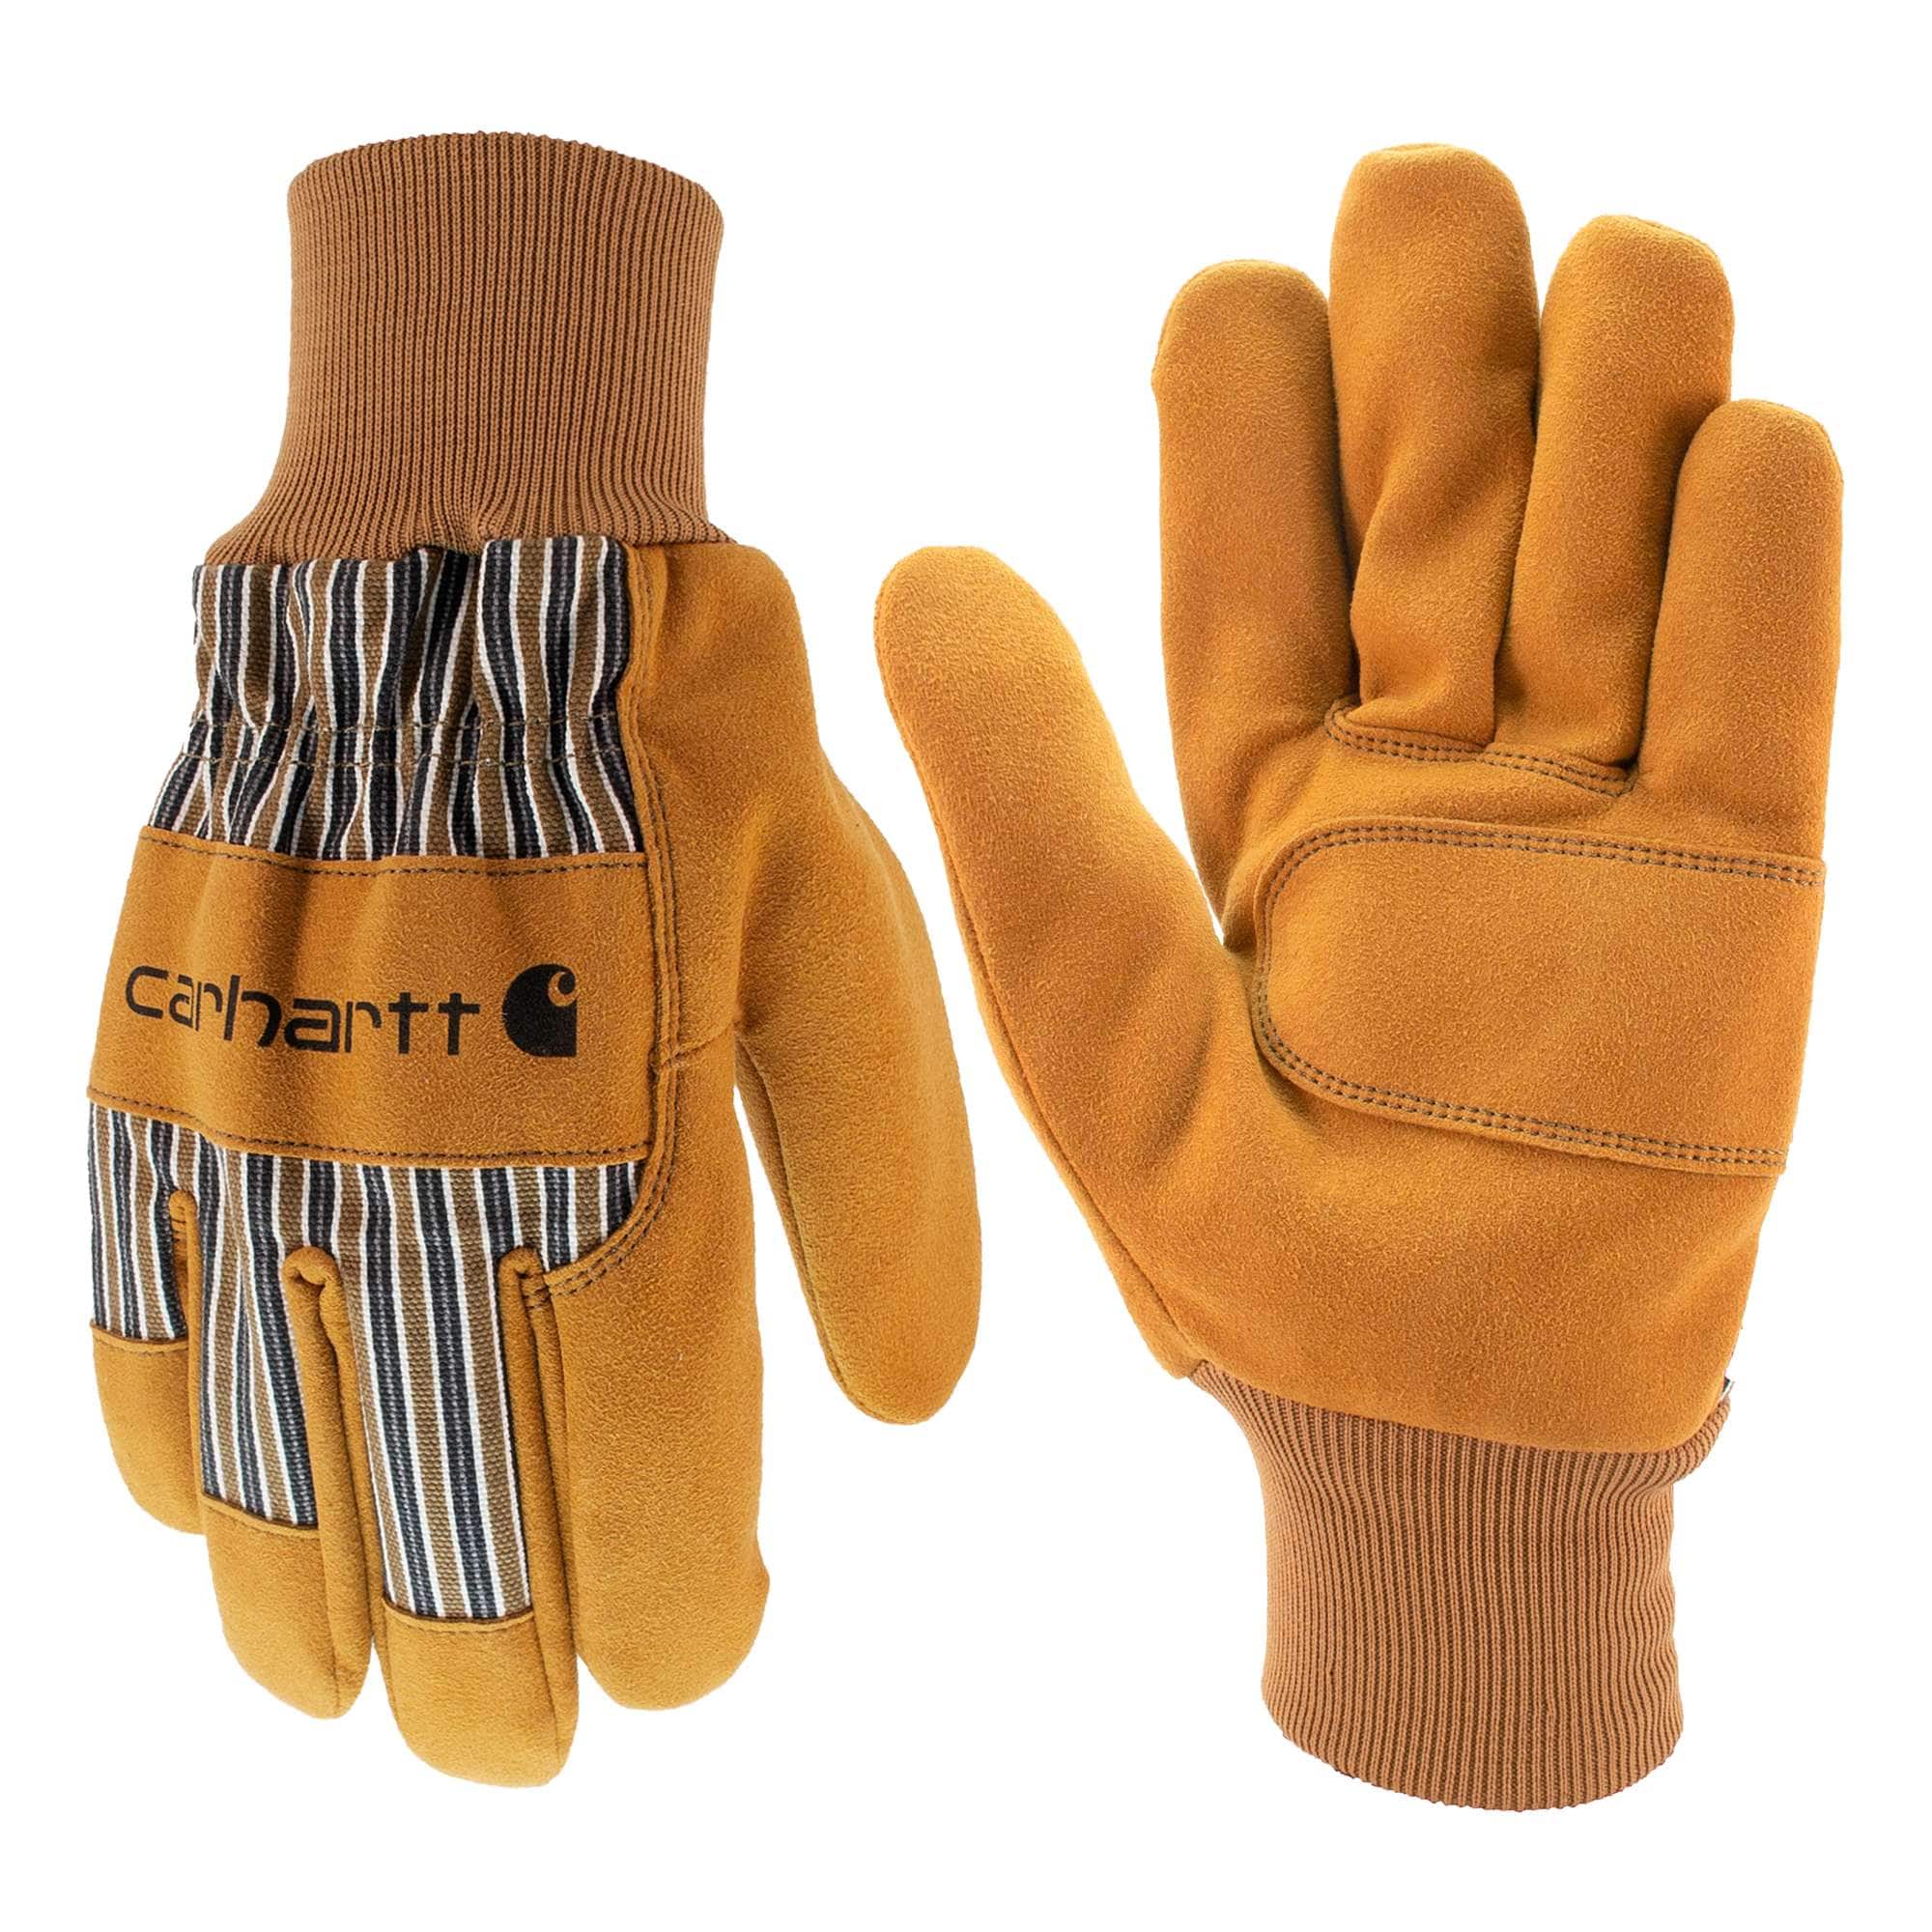 Insulated Synthetic Suede Knit Cuff Work Glove